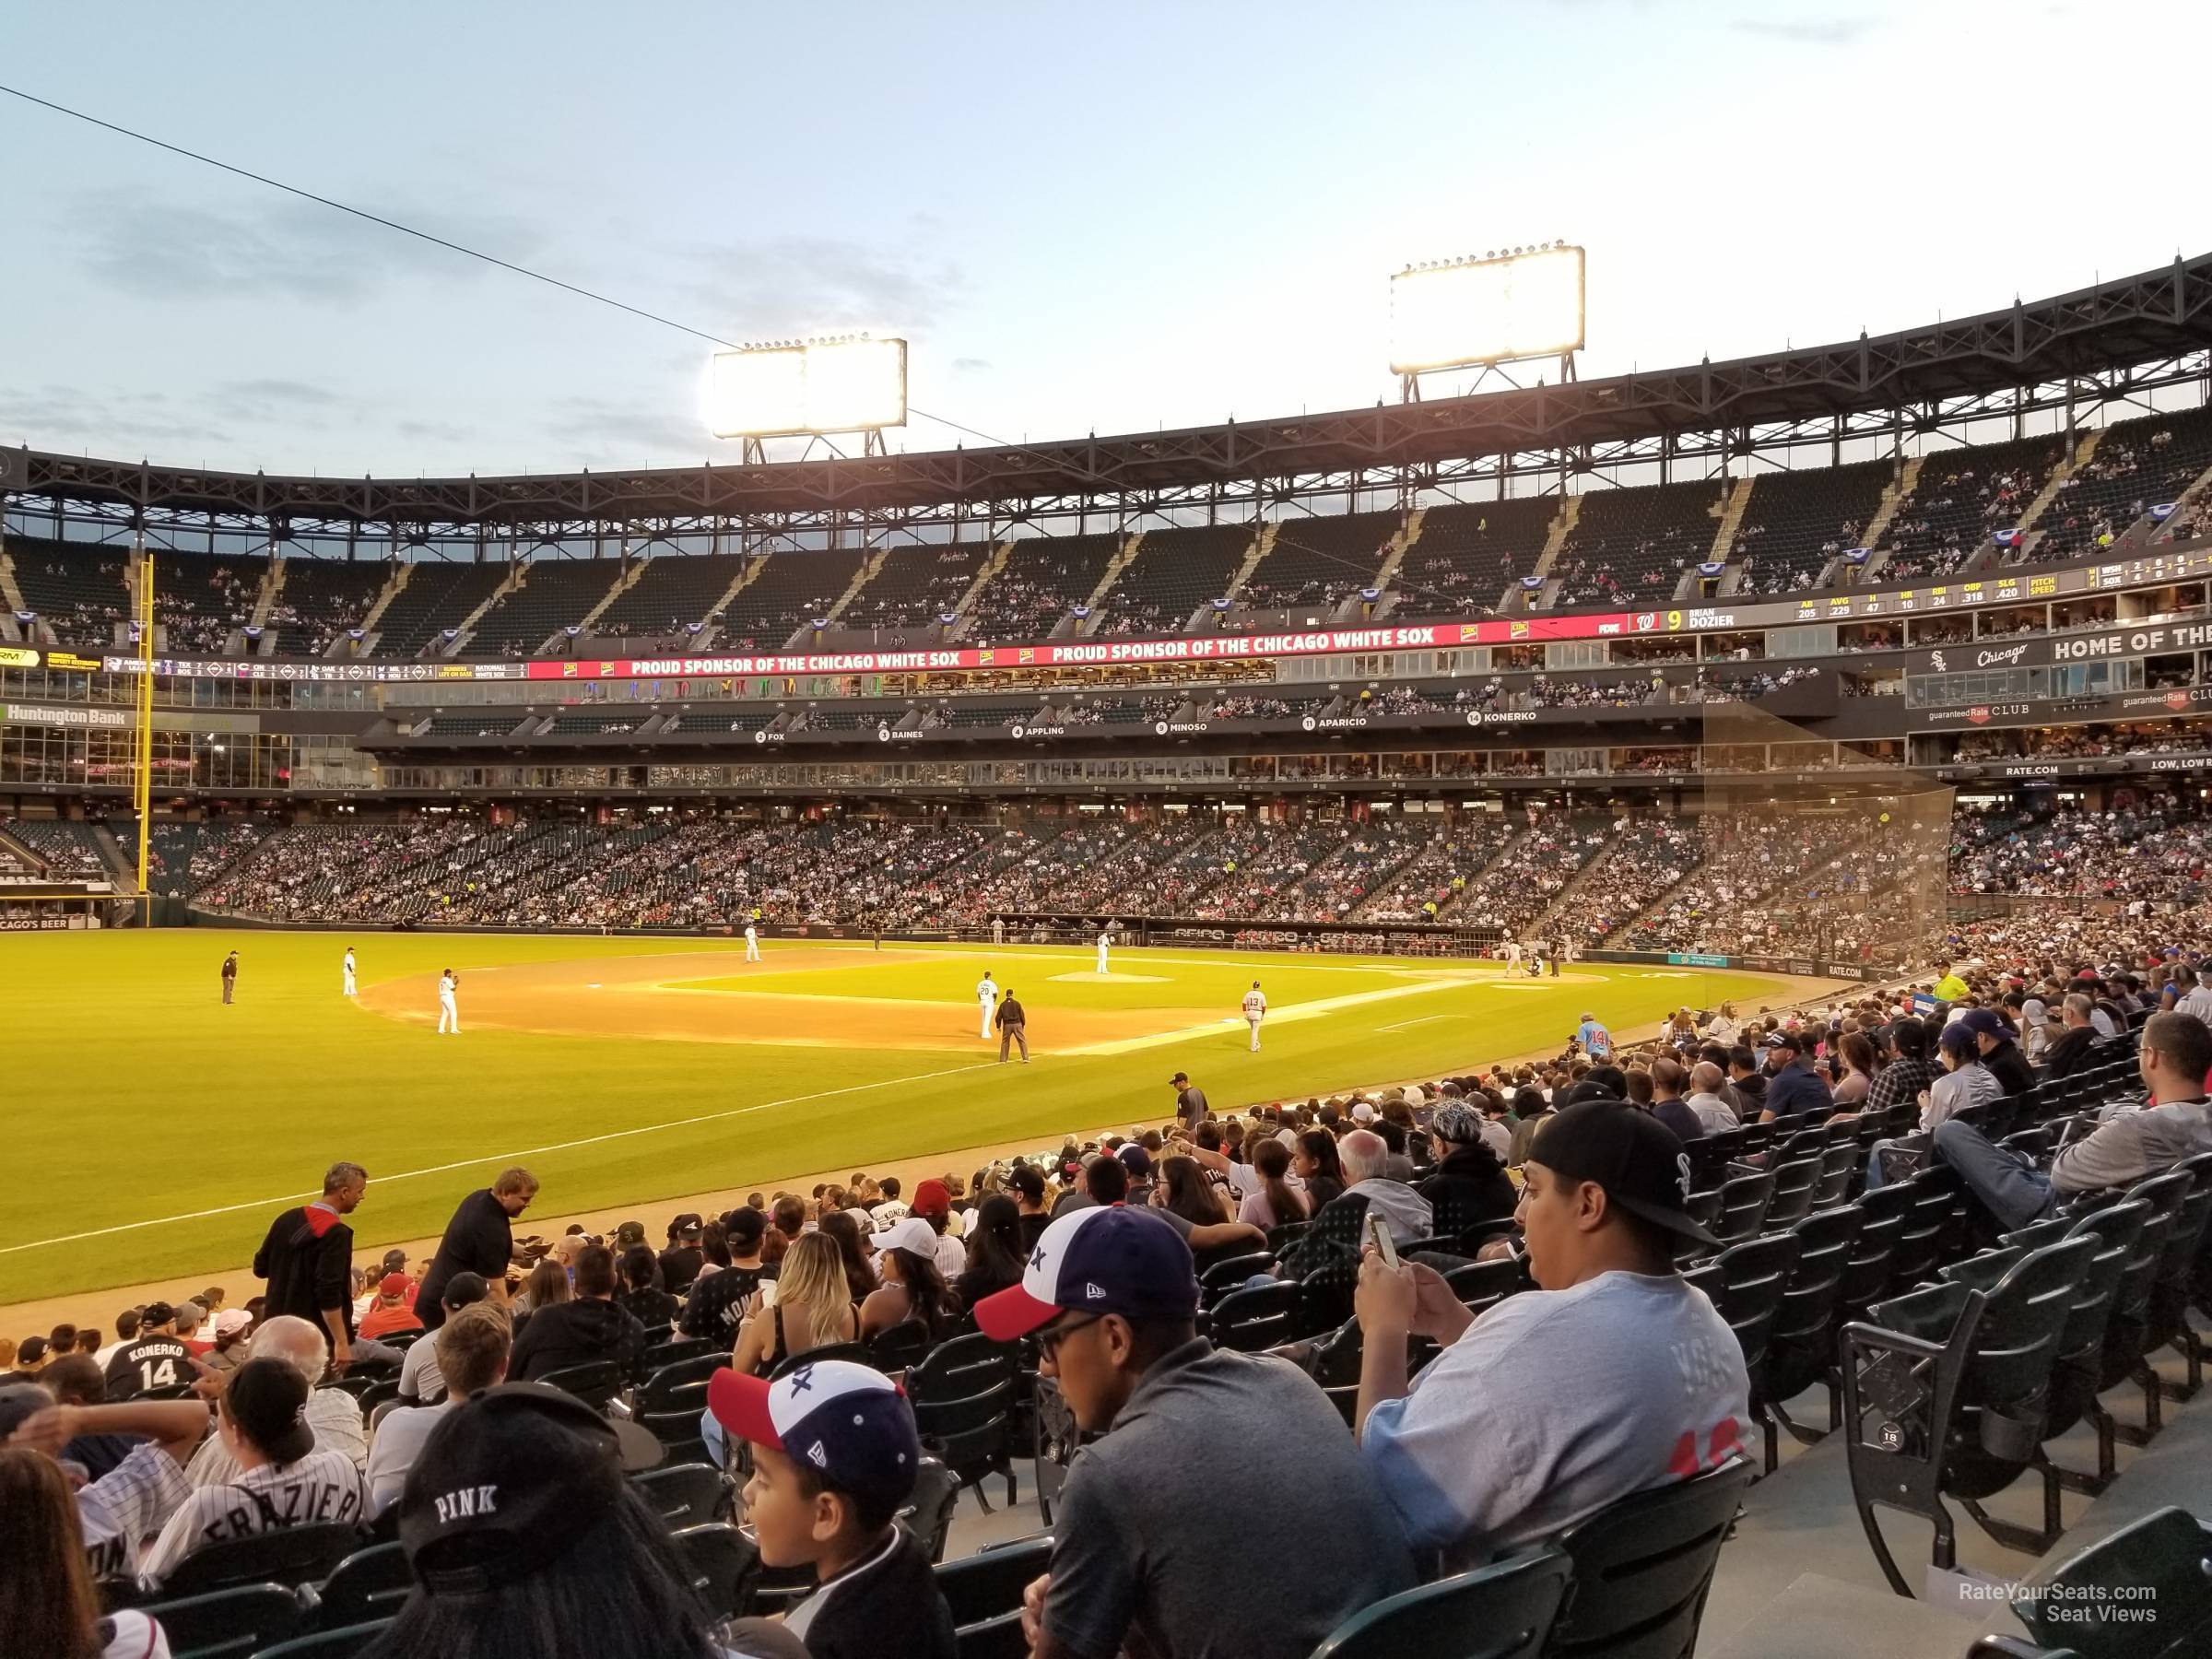 section 149, row 20 seat view  - guaranteed rate field